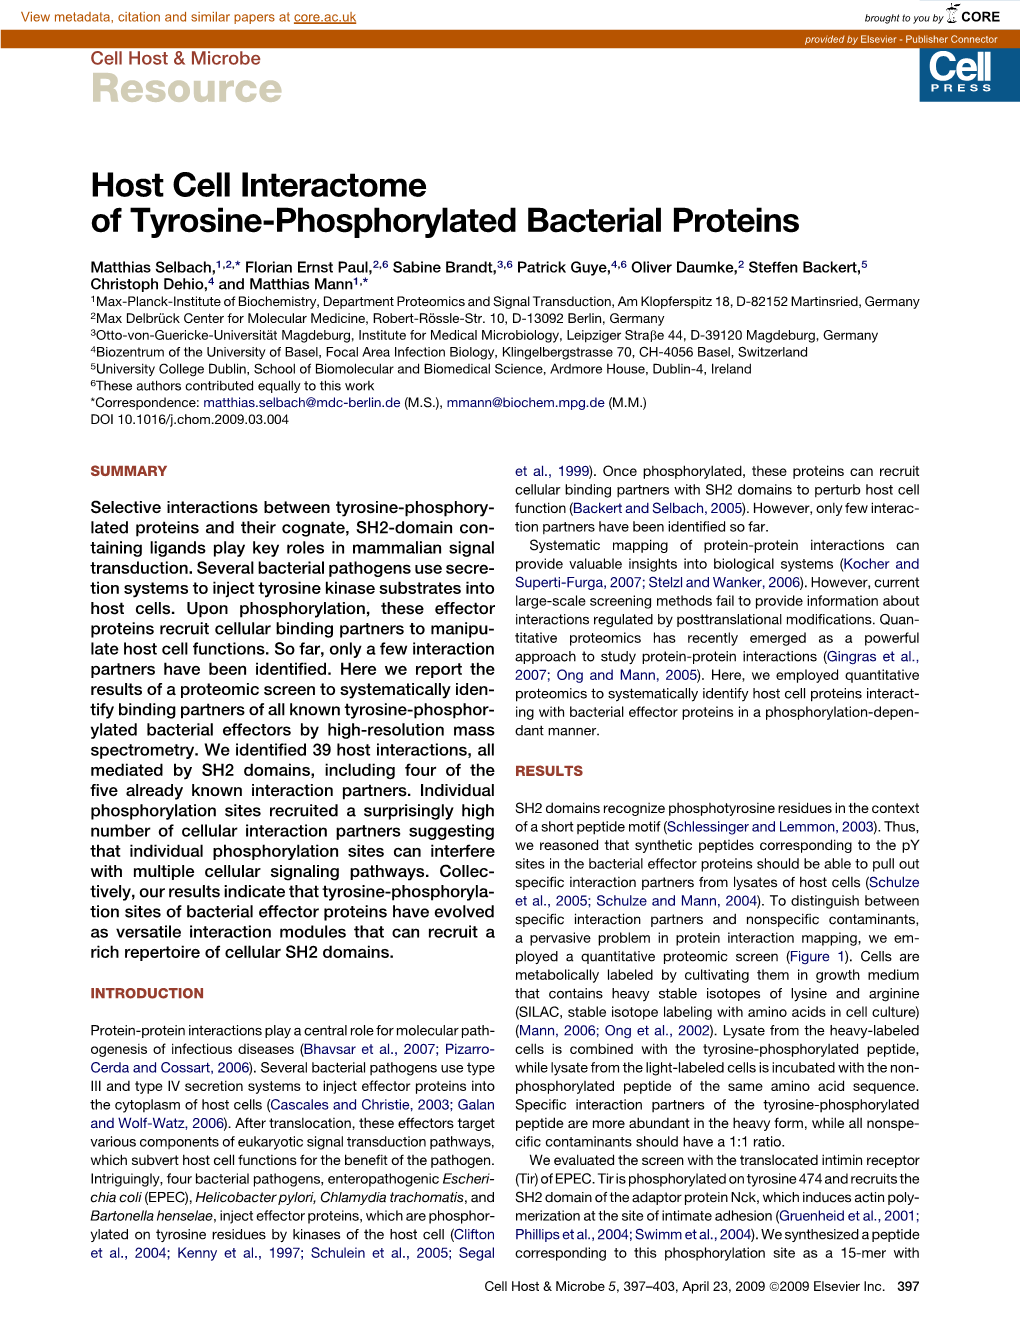 Host Cell Interactome of Tyrosine-Phosphorylated Bacterial Proteins